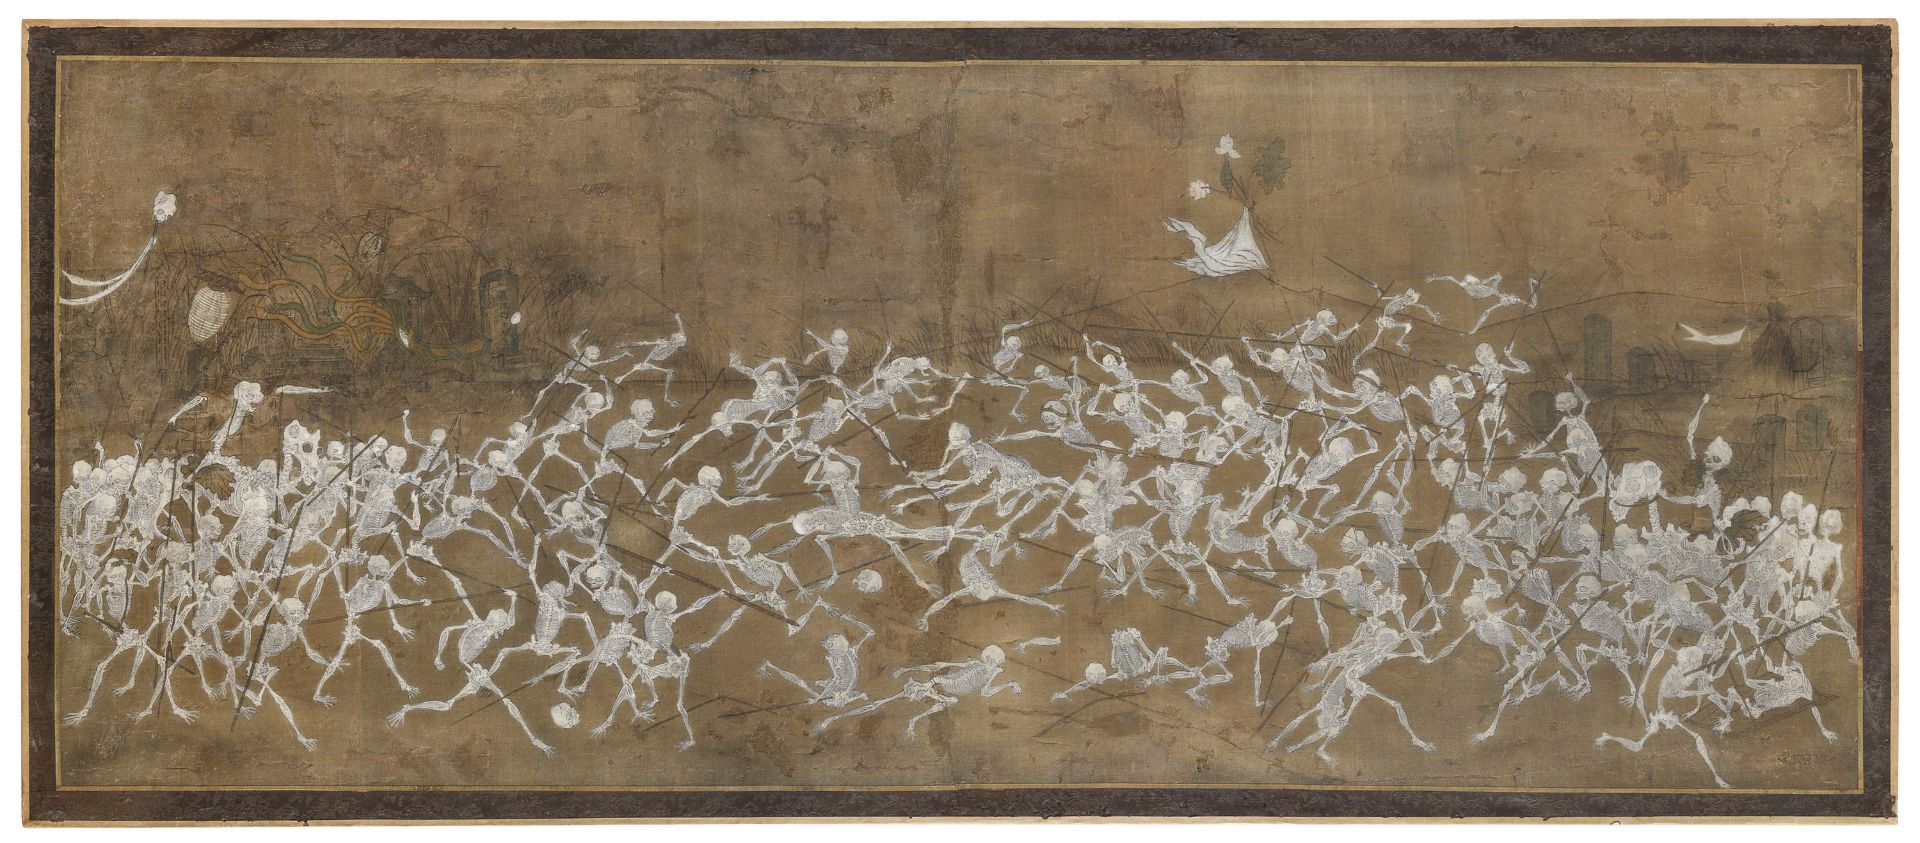 A JAPANESE MIXED MEDIA ON SILK DEPICTING BATTLE WITH SKELETONS. MEIJI PERIOD (1868 - 1912).